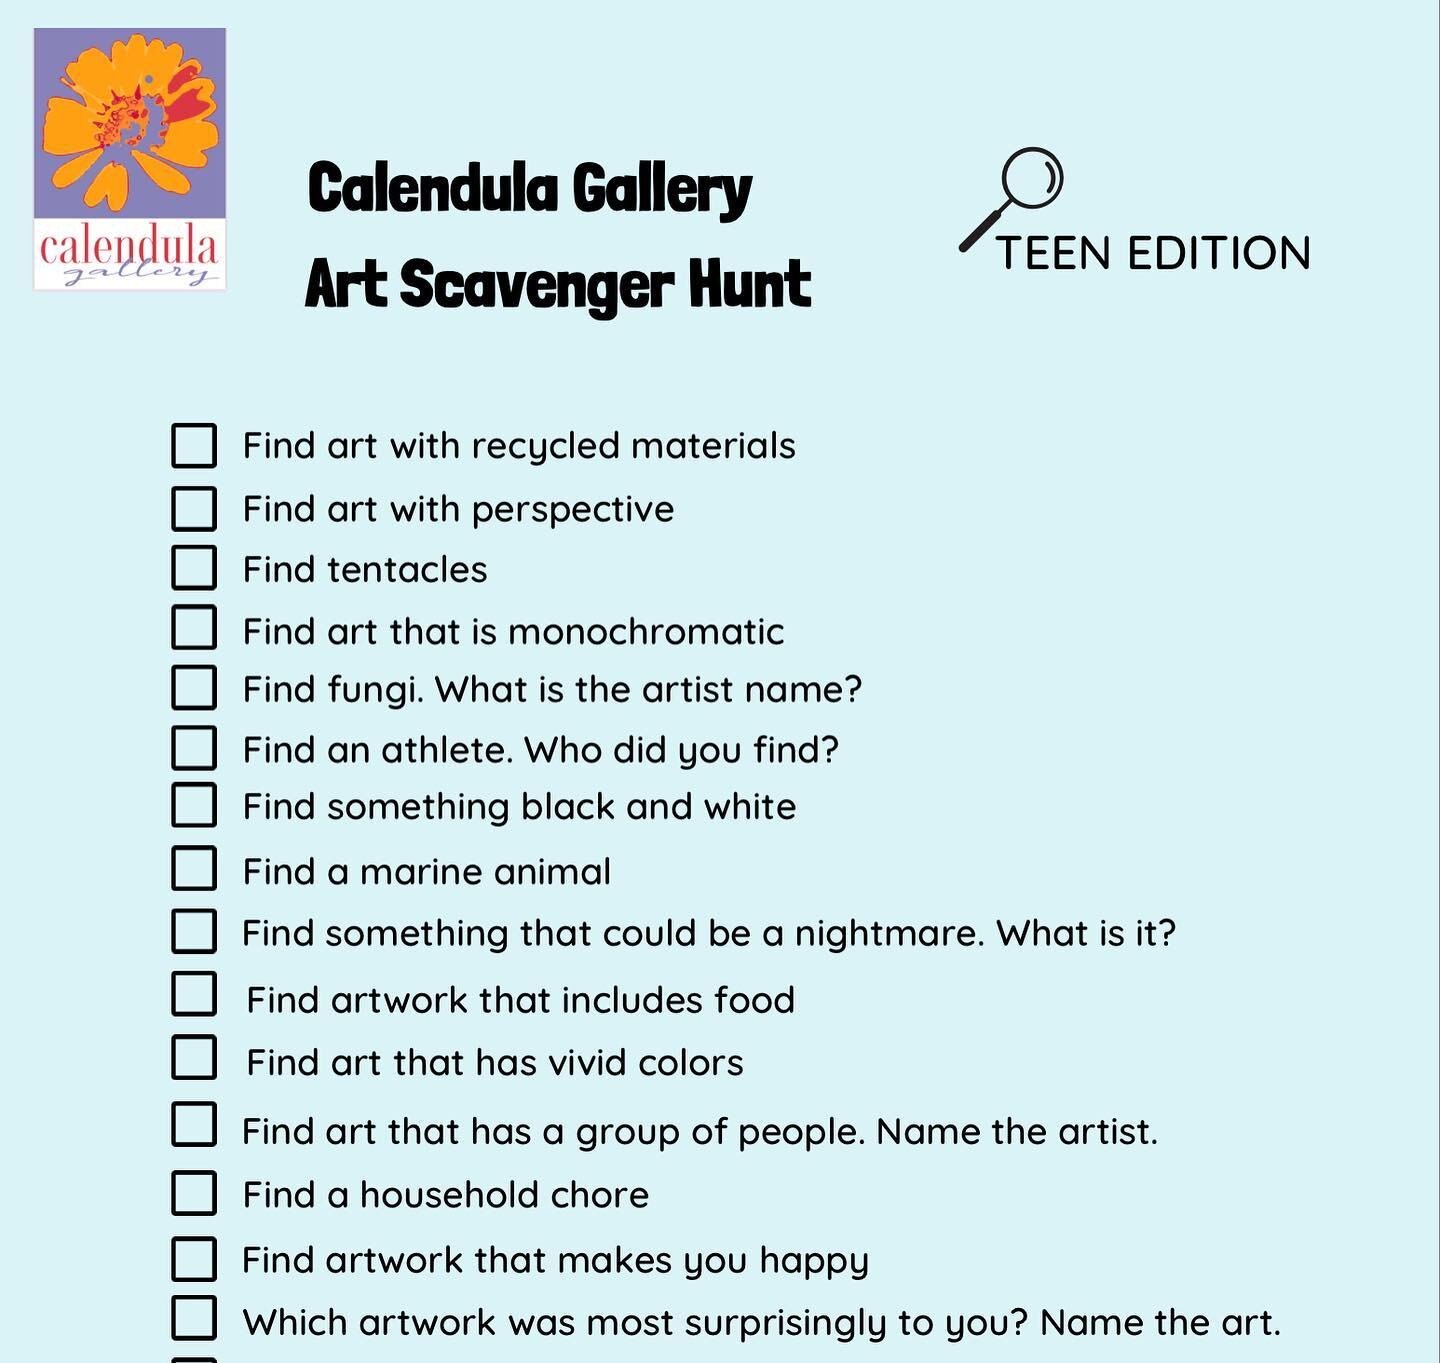 Come play our Art Scavenger Hunt starting Saturday. Kid, teen and adult versions!  Stop in after shopping @stpaulfarmersmarket #artactivities #gallery #cheapdate #familyfun